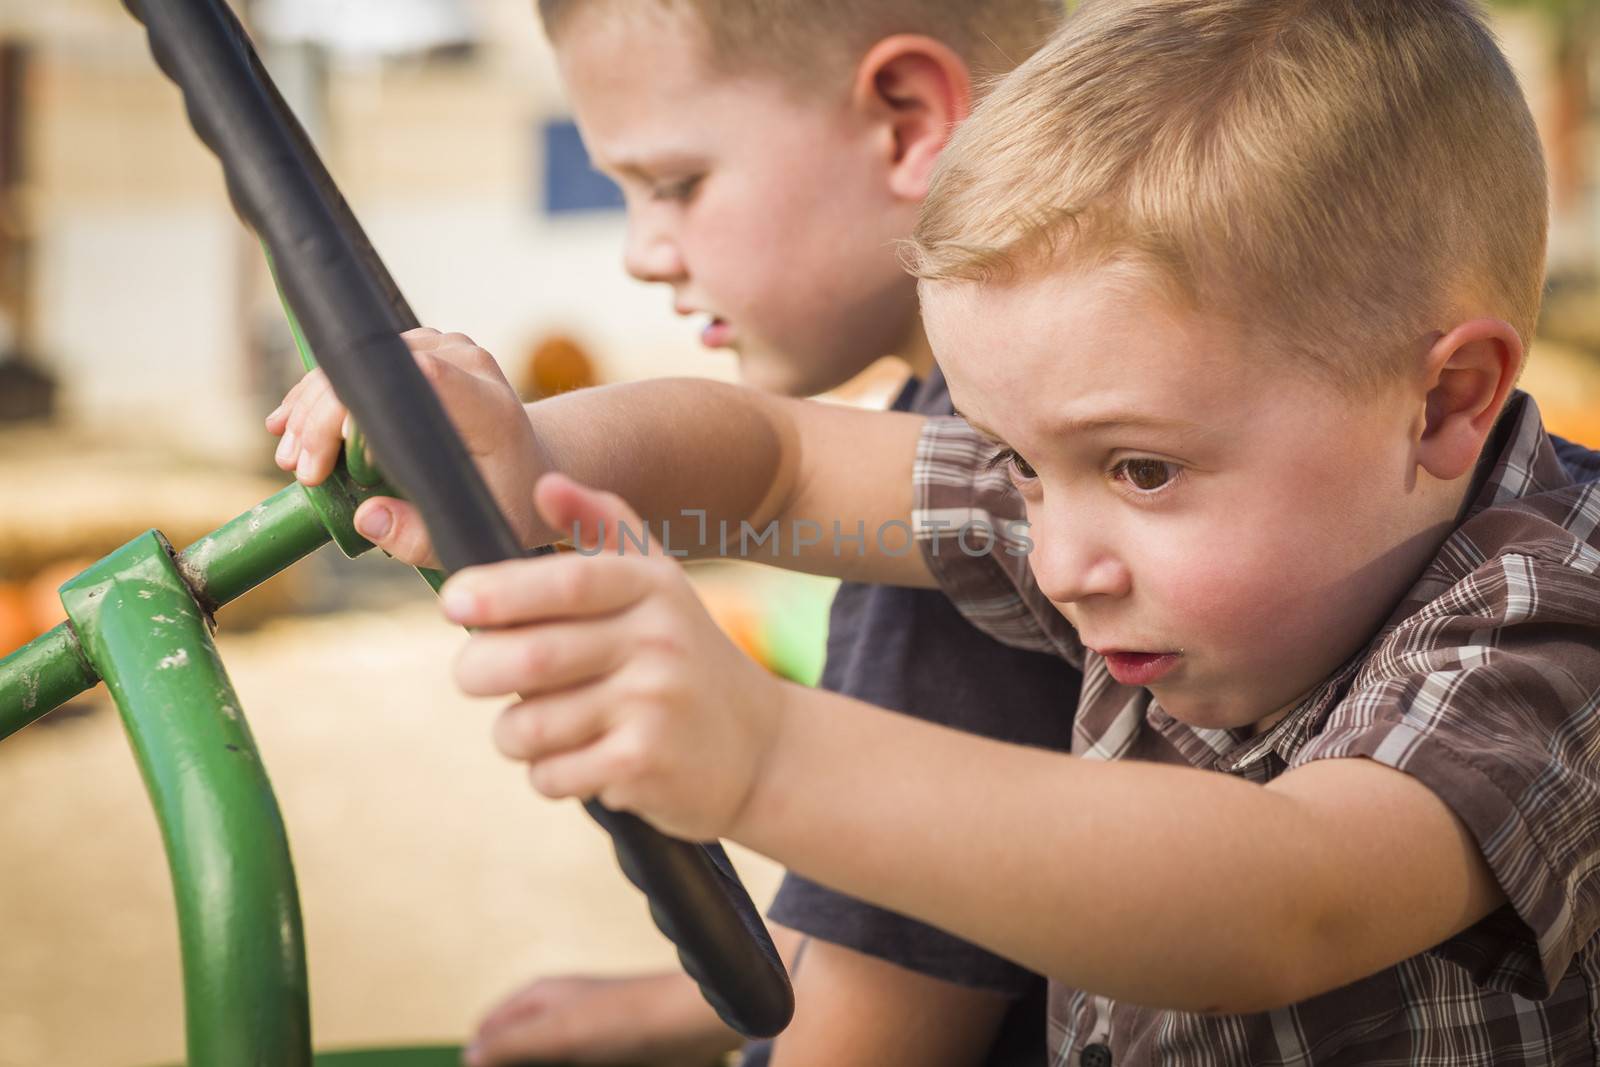 Adorable Young Boys Playing on an Old Tractor Outside by Feverpitched